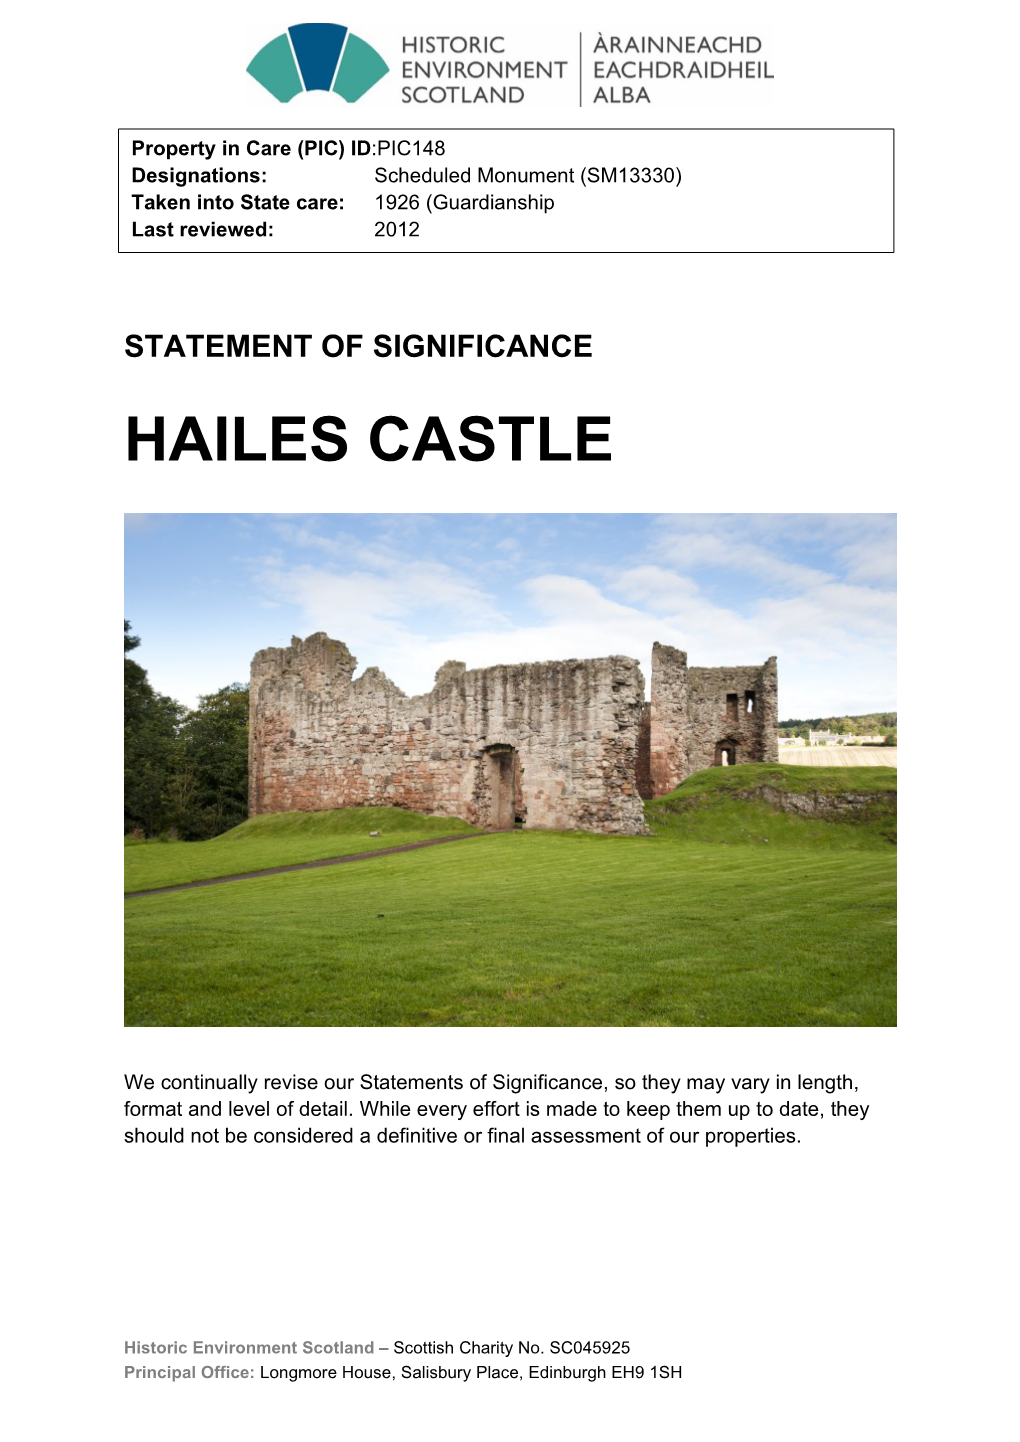 Hailes Castle Statement of Significance